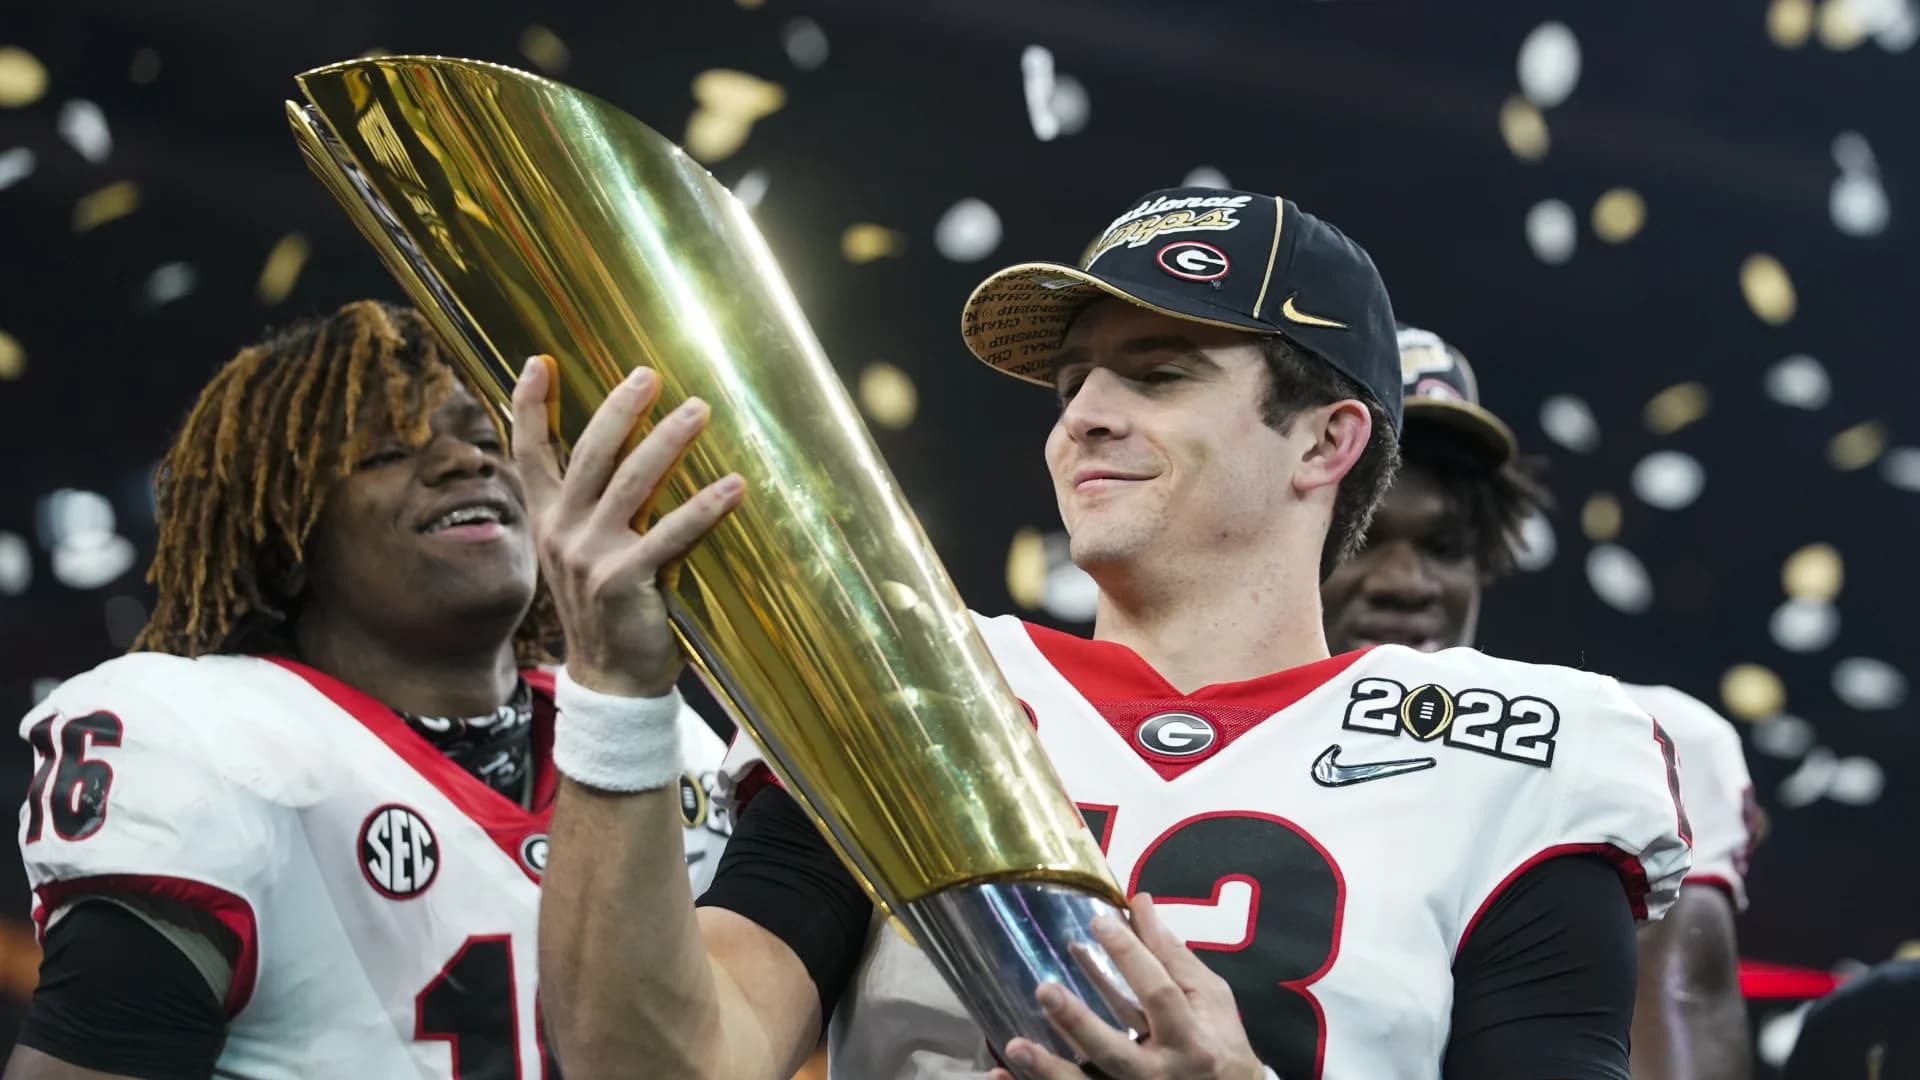 Georgia snaps 41-year title drought with 33-18 win over Bama